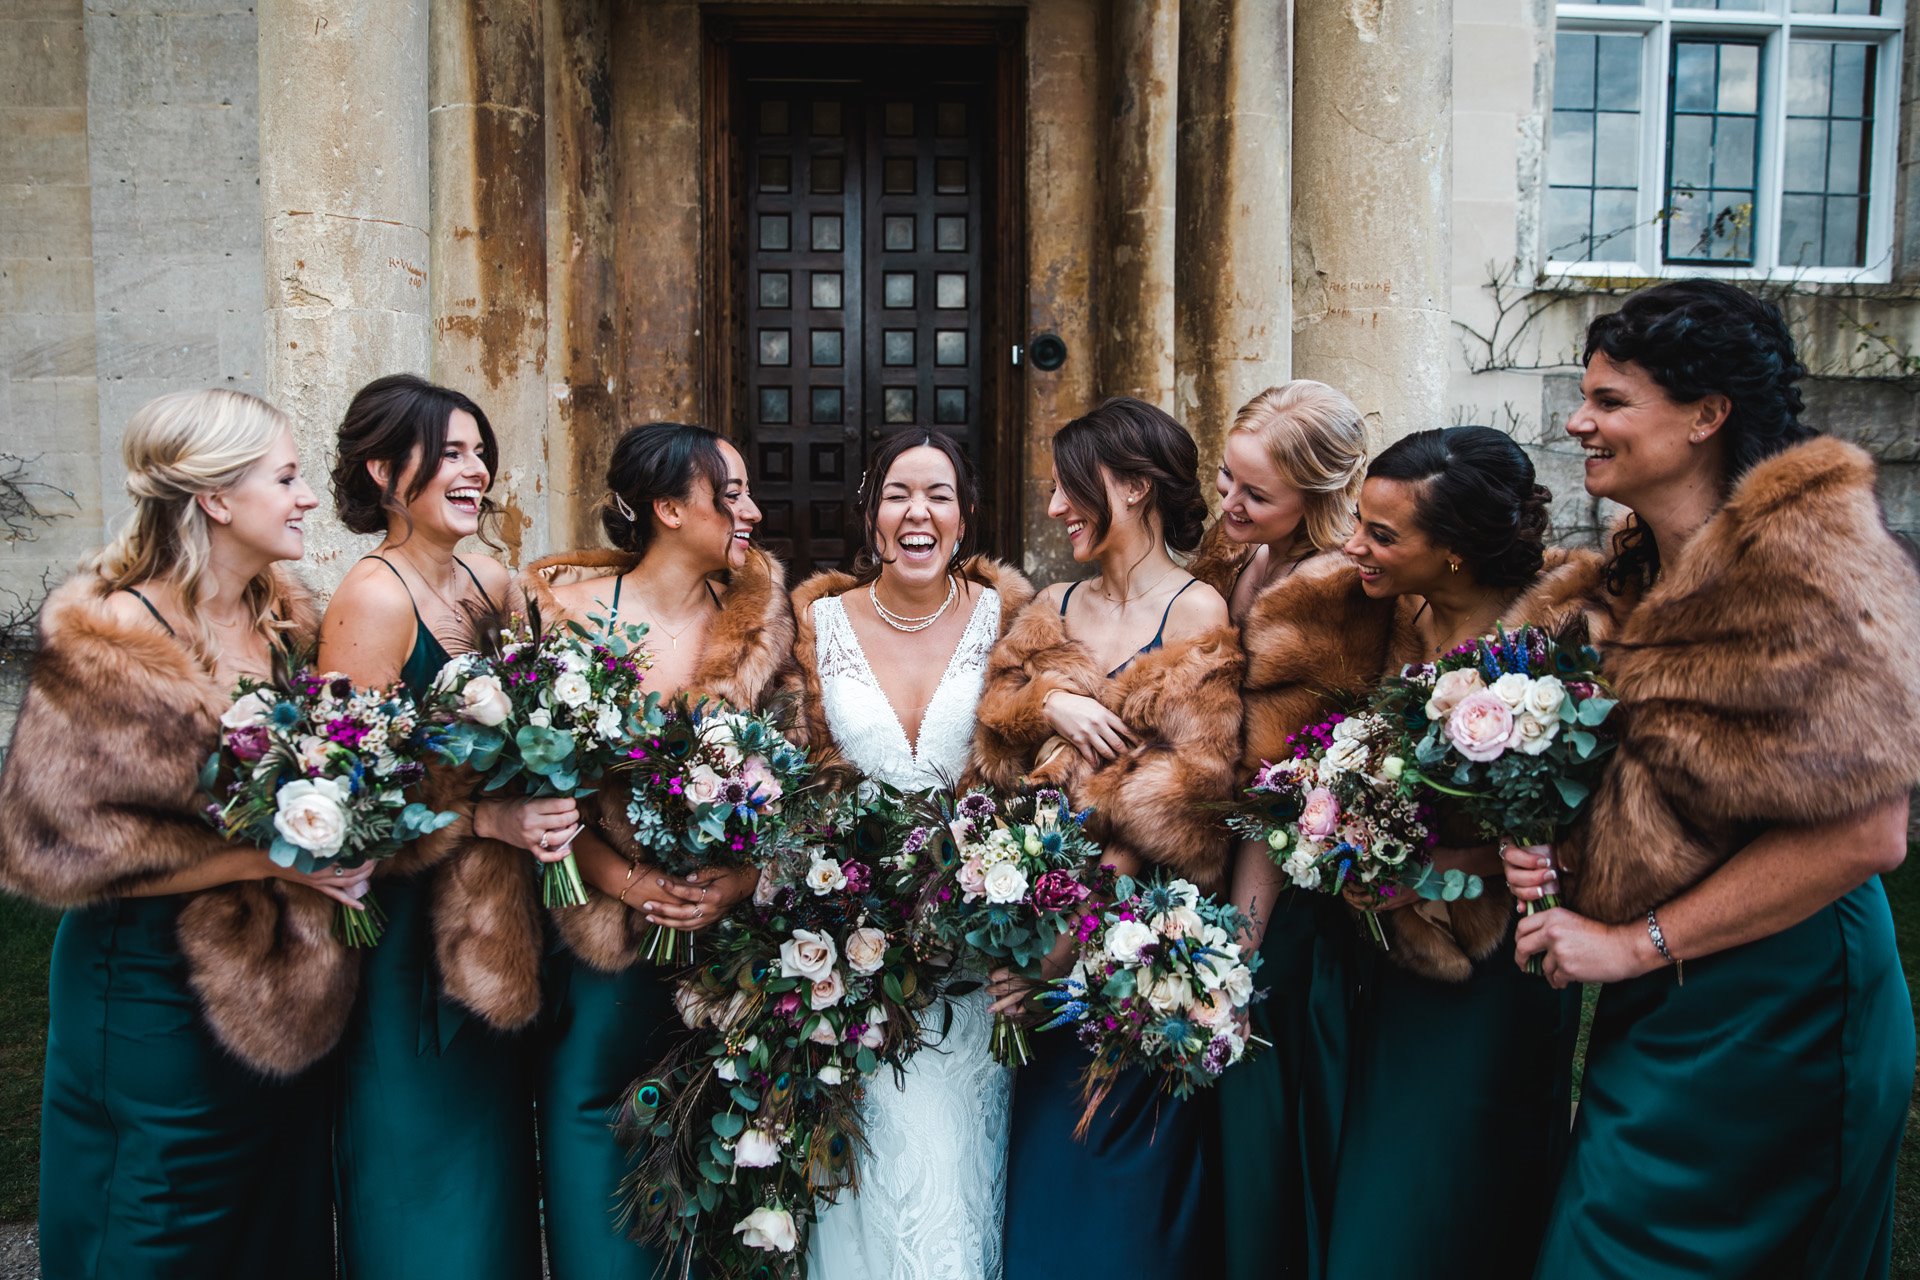 Big bridal party of 7 bridesmaids laugh and smile wearing faux fur in front of grade 2 listed exclusive use wedding venue